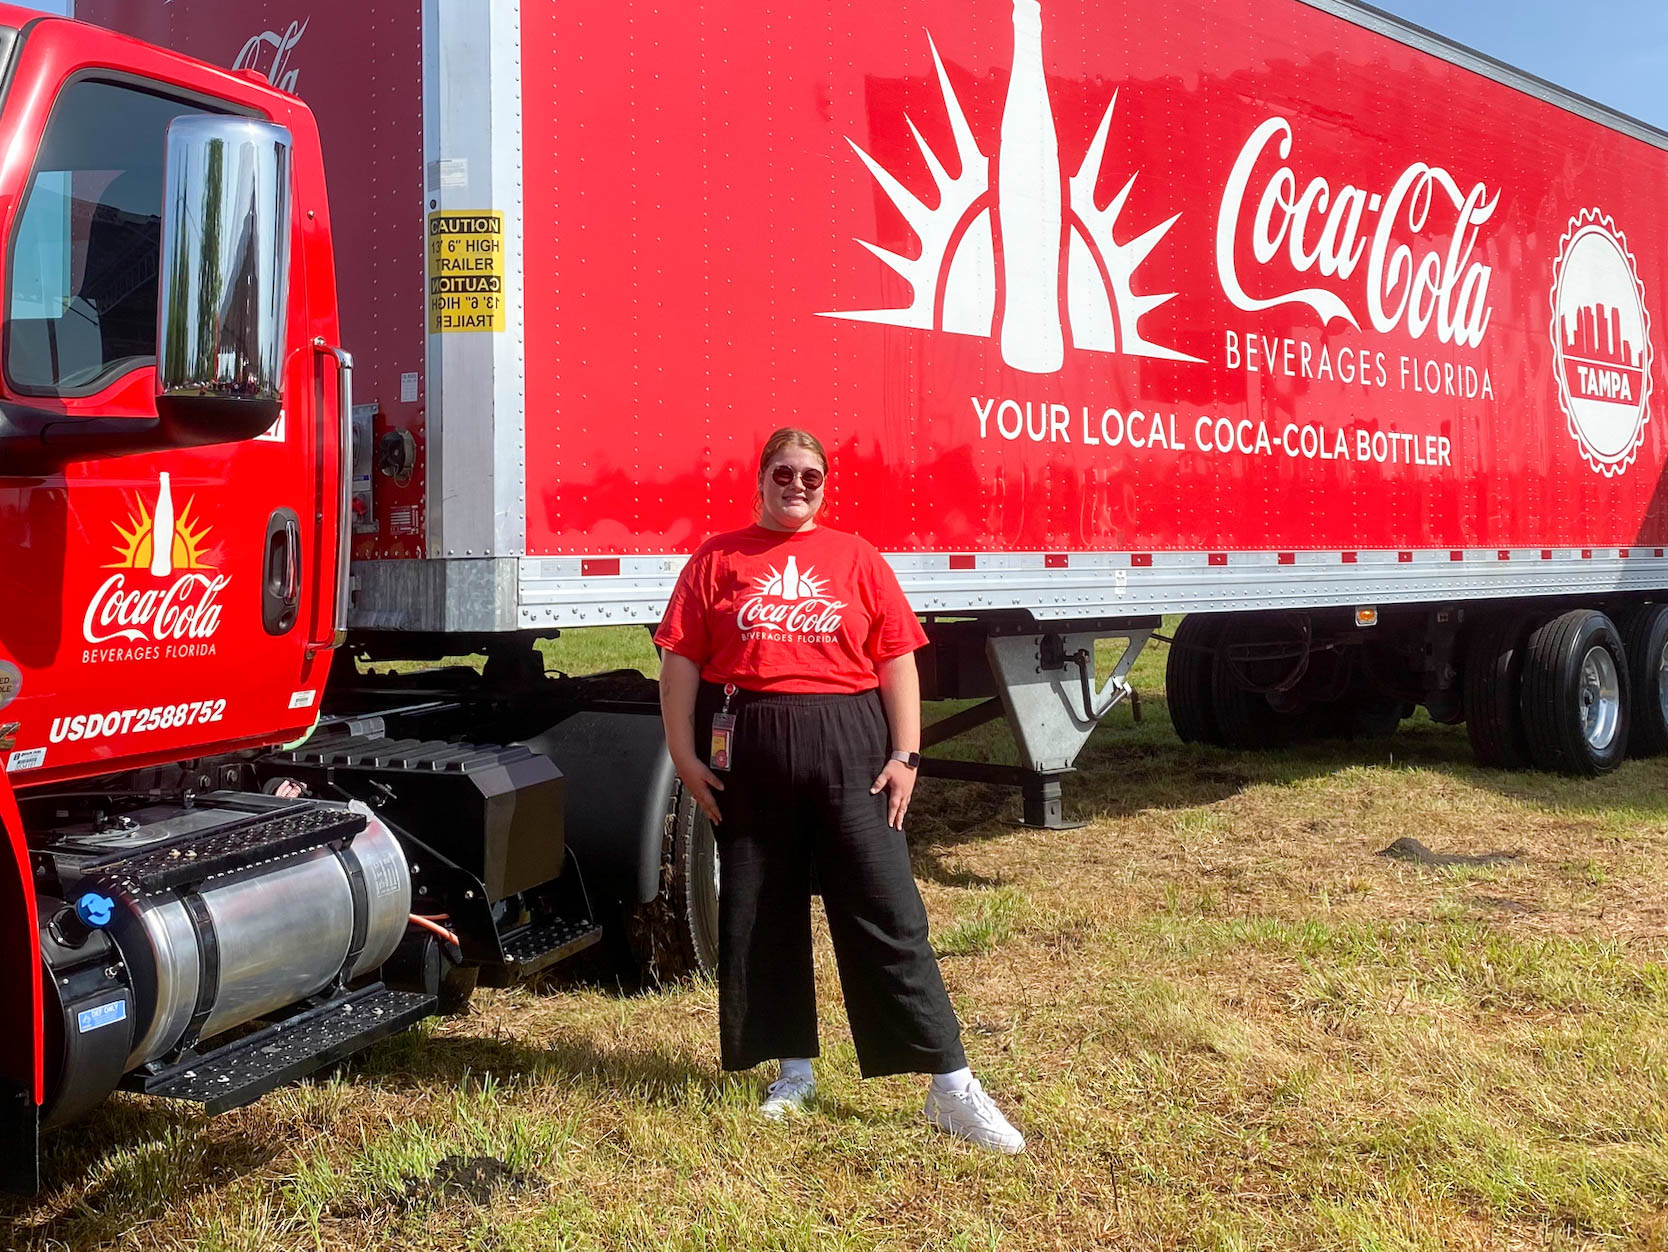 Sam Morrison is a quality and supply chain intern at Coca-Cola Beverages of Florida.